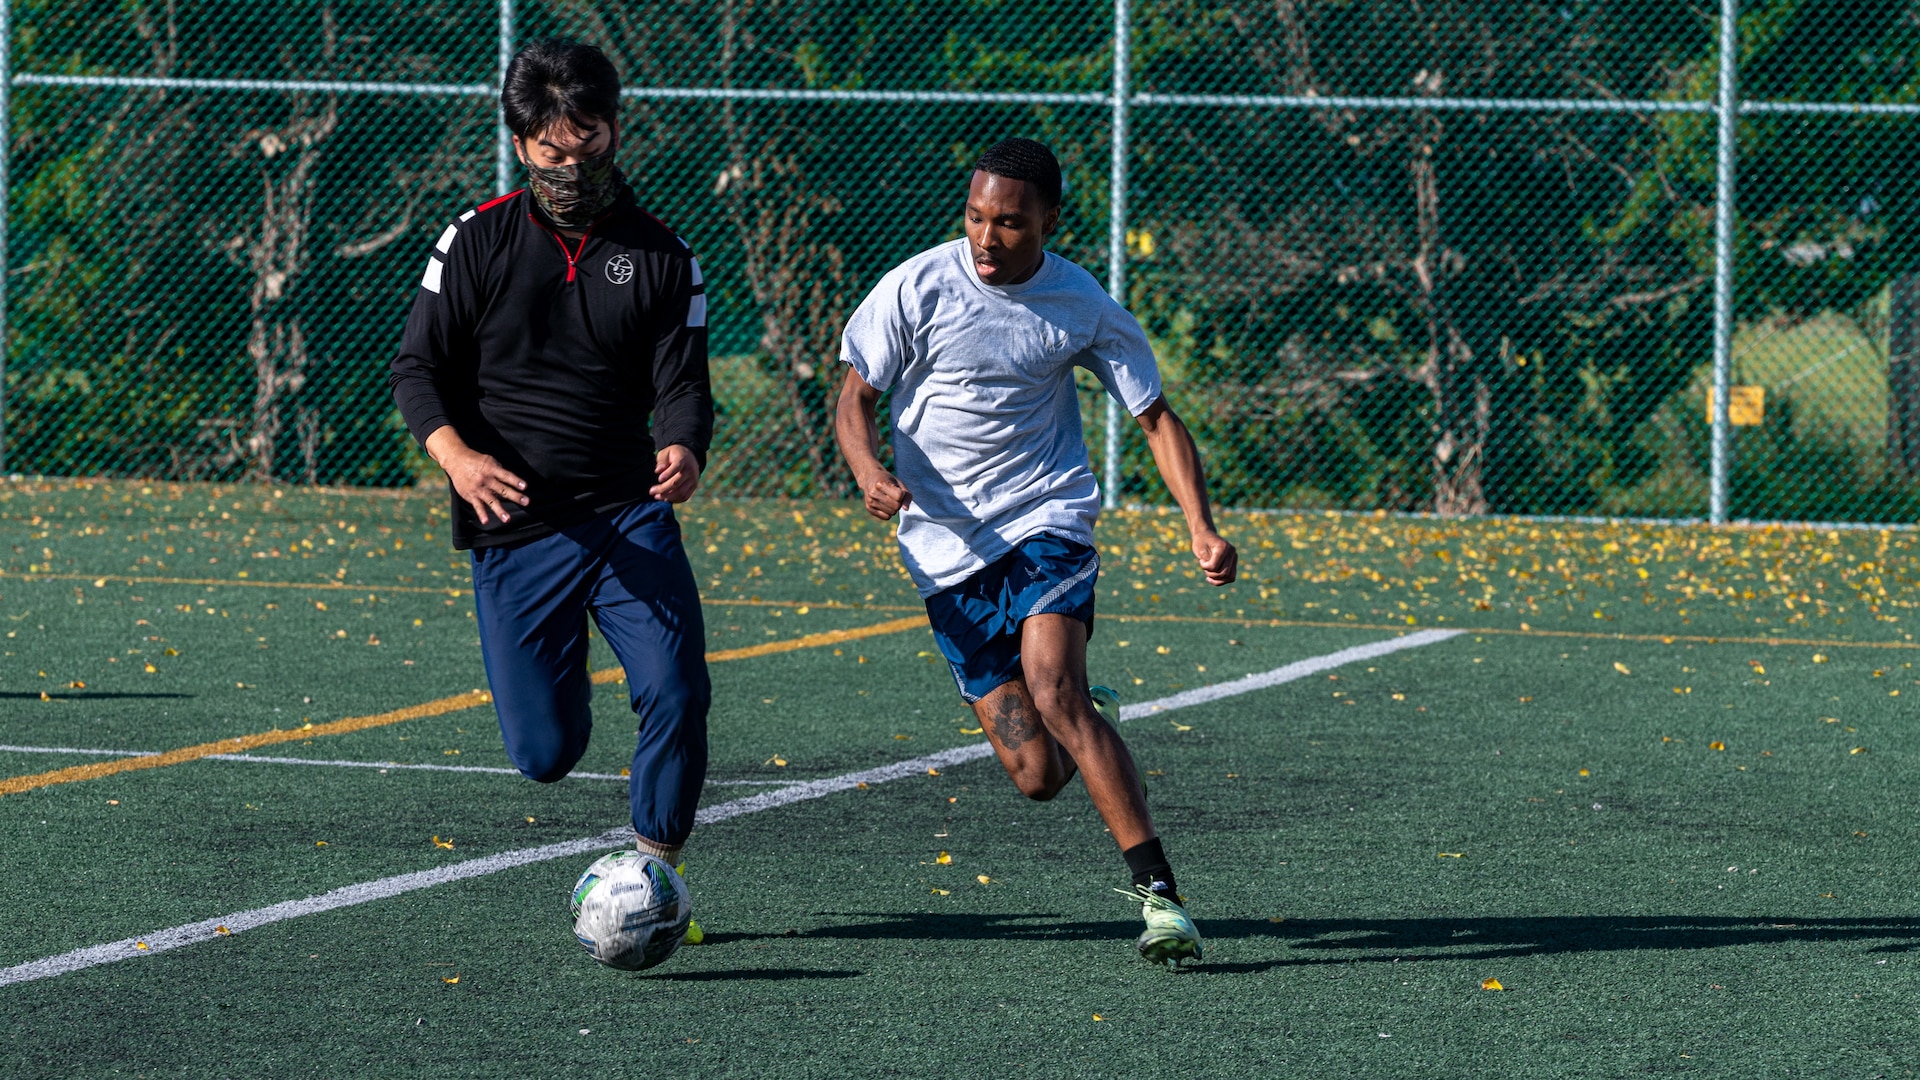 A U.S. Air Force Airman and a Republic of Korea Air Force Airman play for possession of a loose live ball during a soccer exhibition match